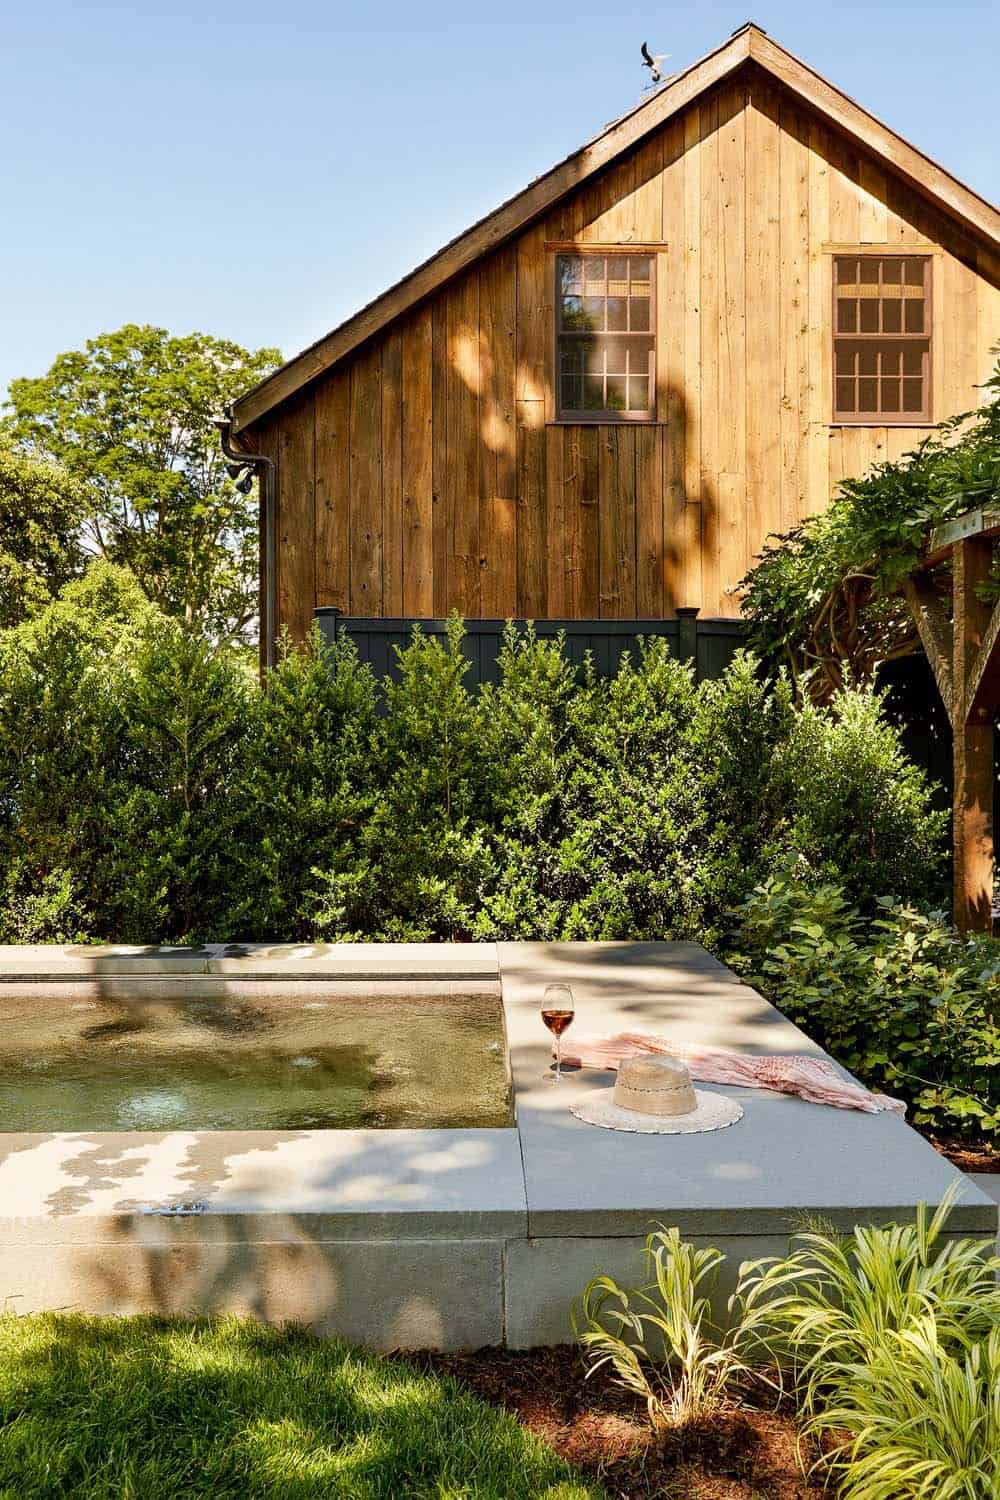 rustic party barn with an outdoor hot tub and surrounding landscape